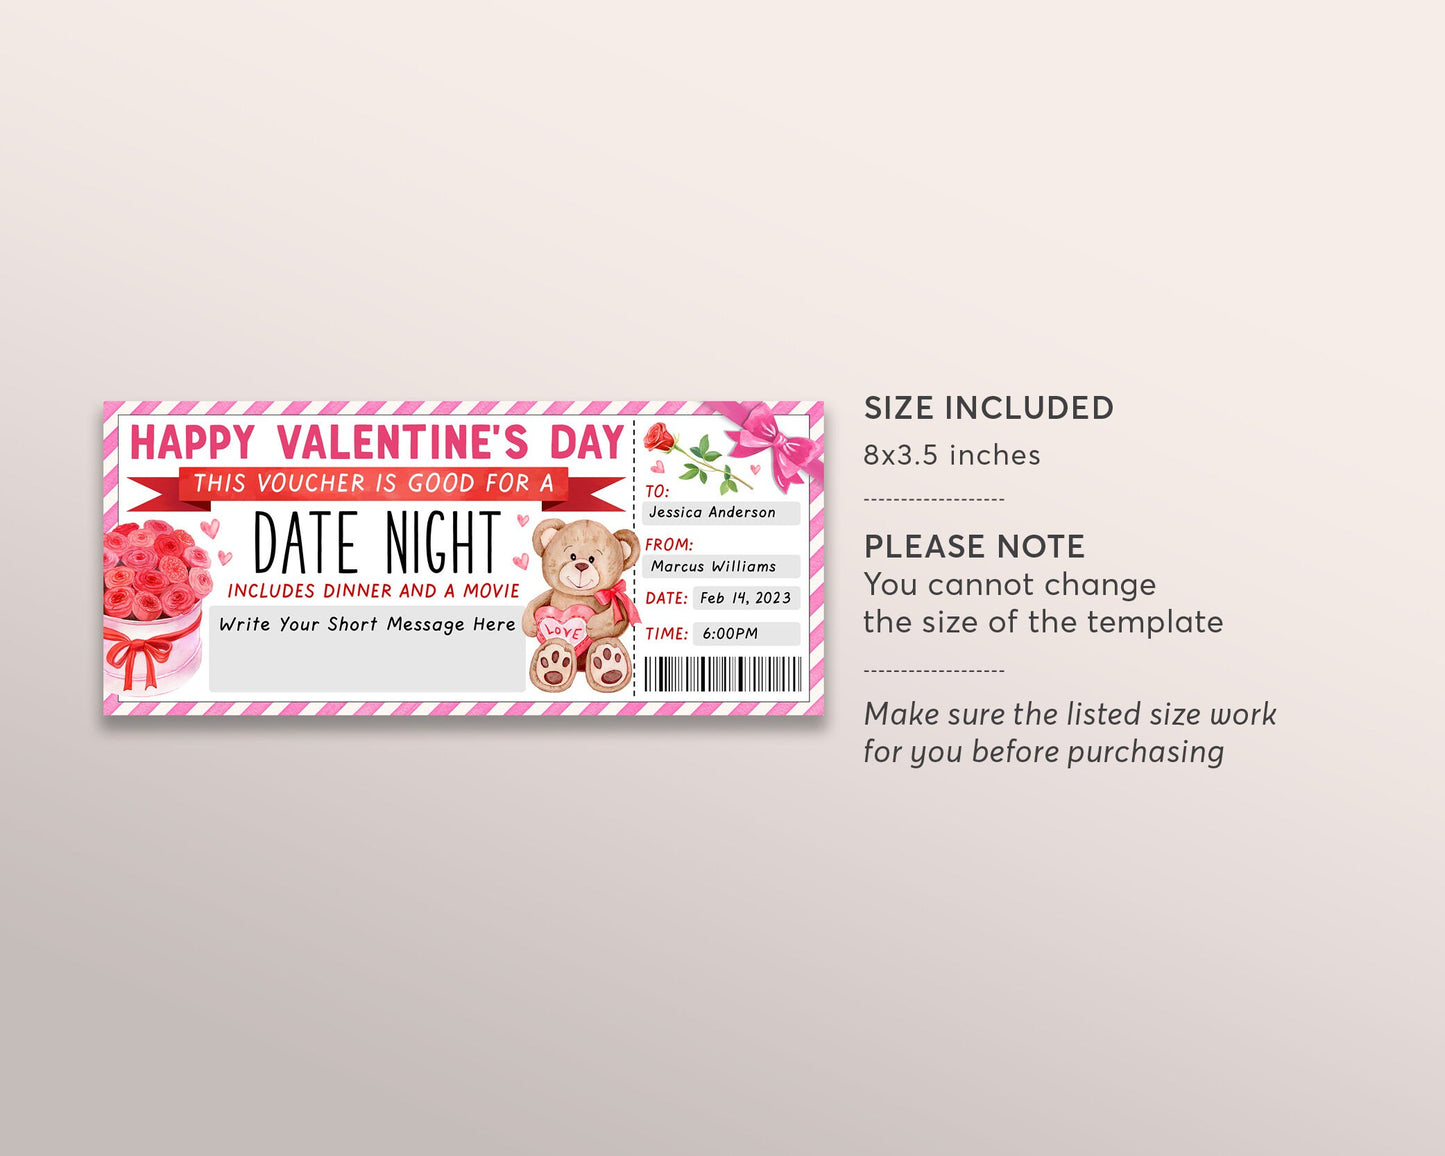 Valentines Day Date Night Gift Voucher Editable Template, Surprise Valentines Dinner Night Gift Certificate, Movie Night Love Coupons DIY